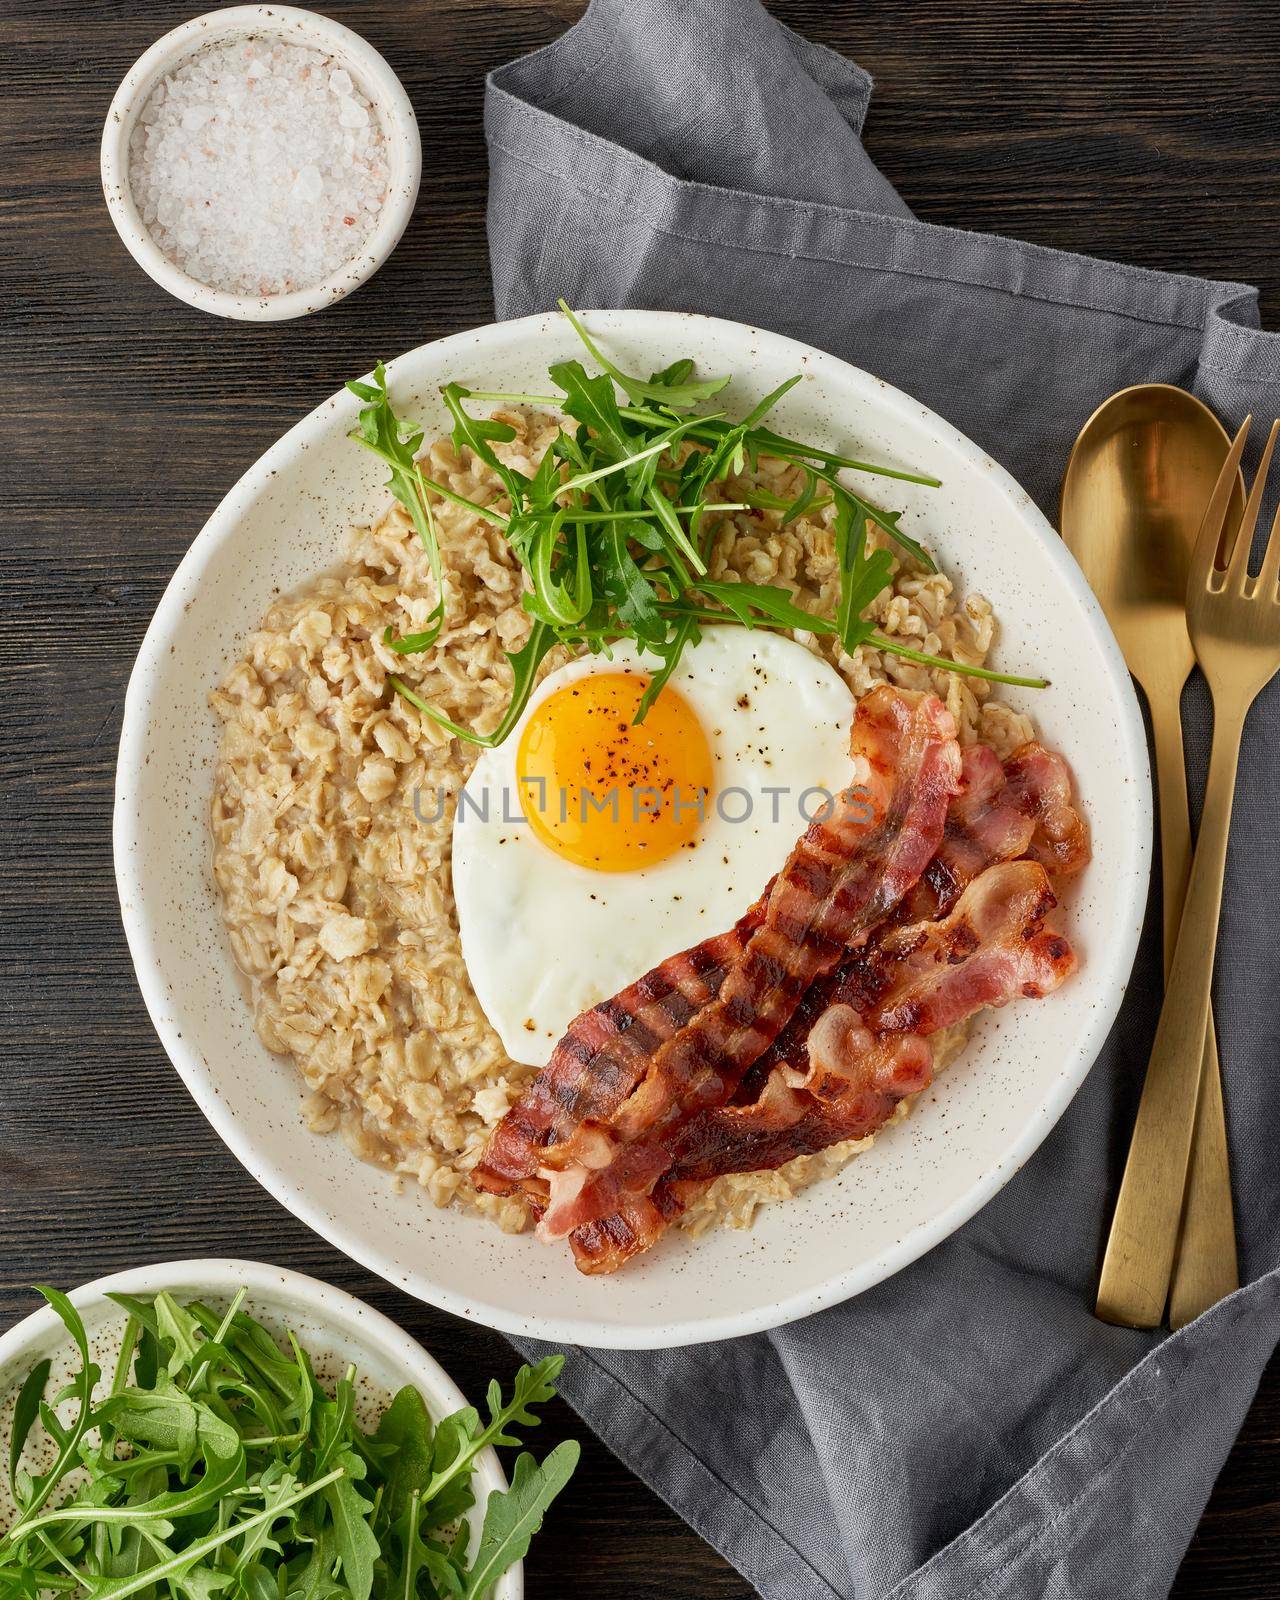 Oatmeal, fried egg and fried bacon. Brutal man sport breakfast. Hearty fat high-calorie breakfast, source of energy. Balance of proteins, fats, carbohydrates. Balanced food. Vertical